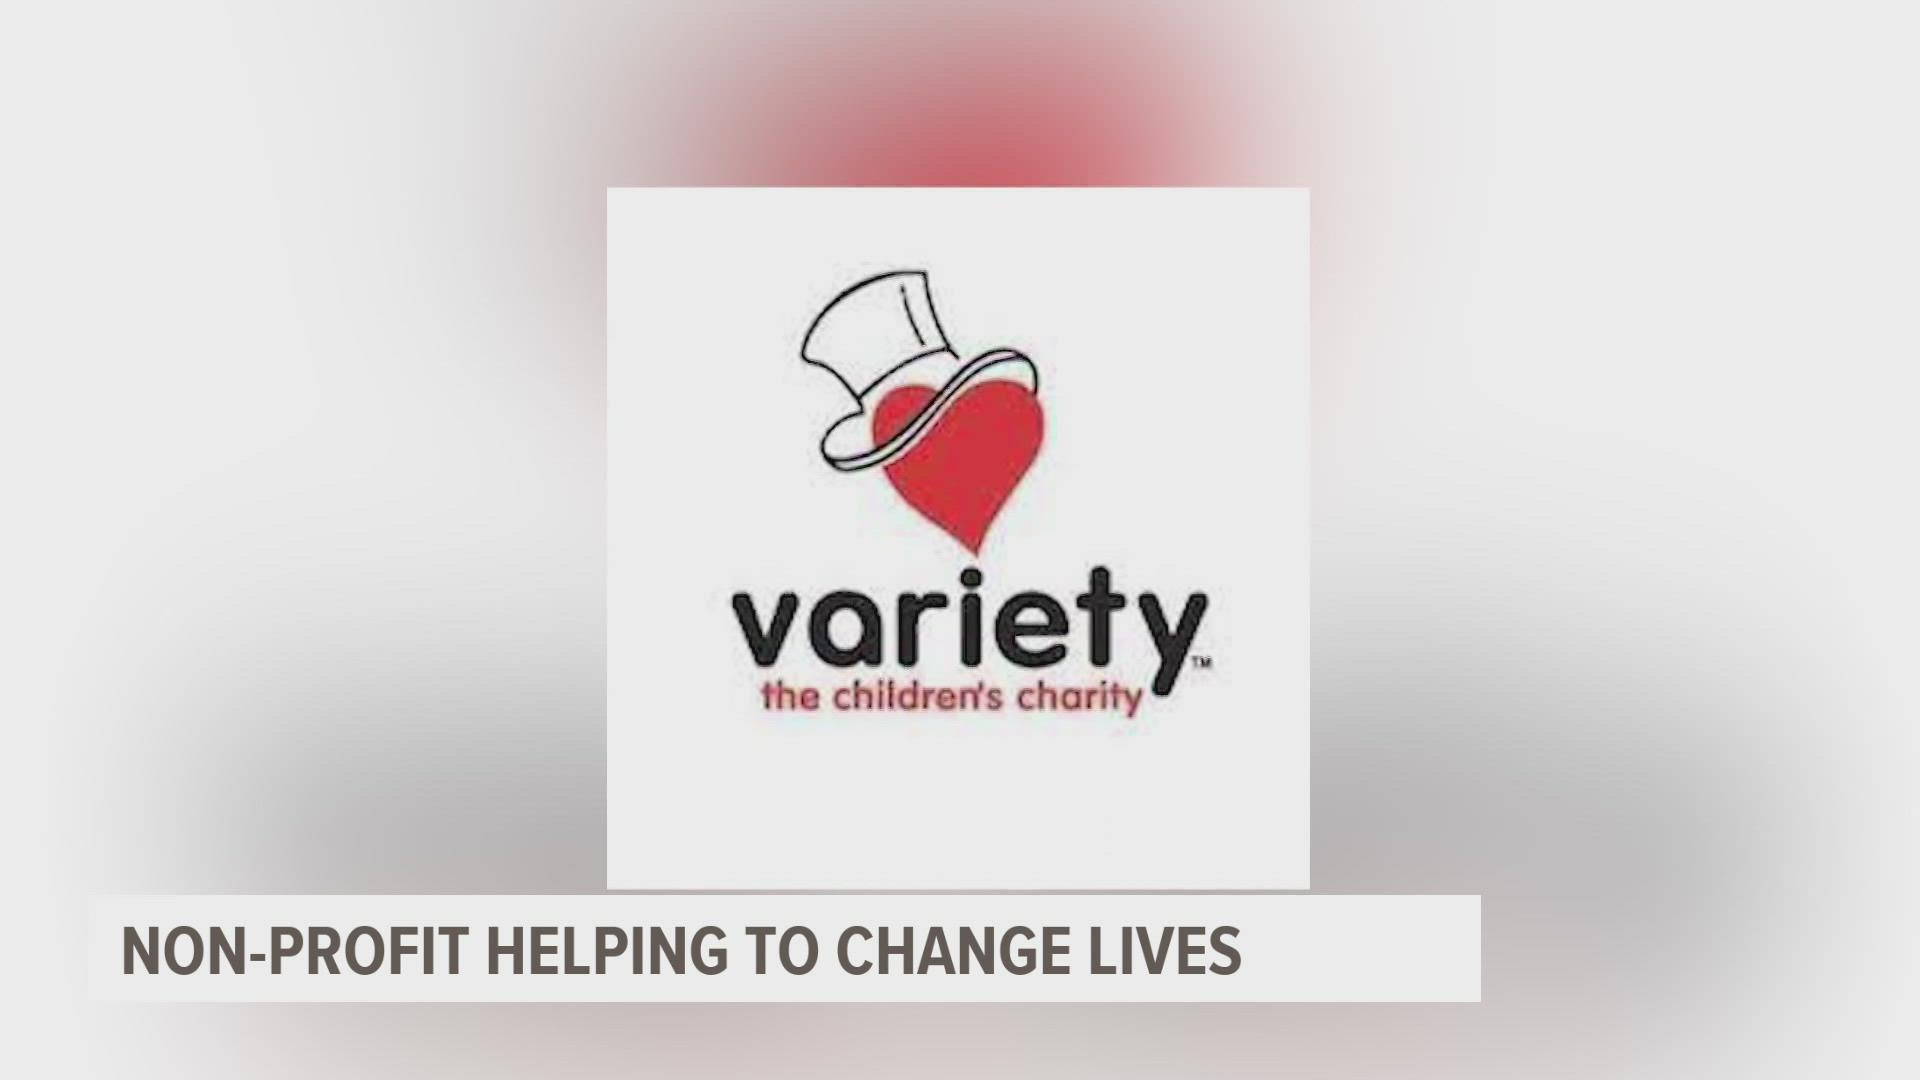 Variety, The Children's Charity helps change thousands of kids lives every year. Two parents share how the non-profit helped their daughter.